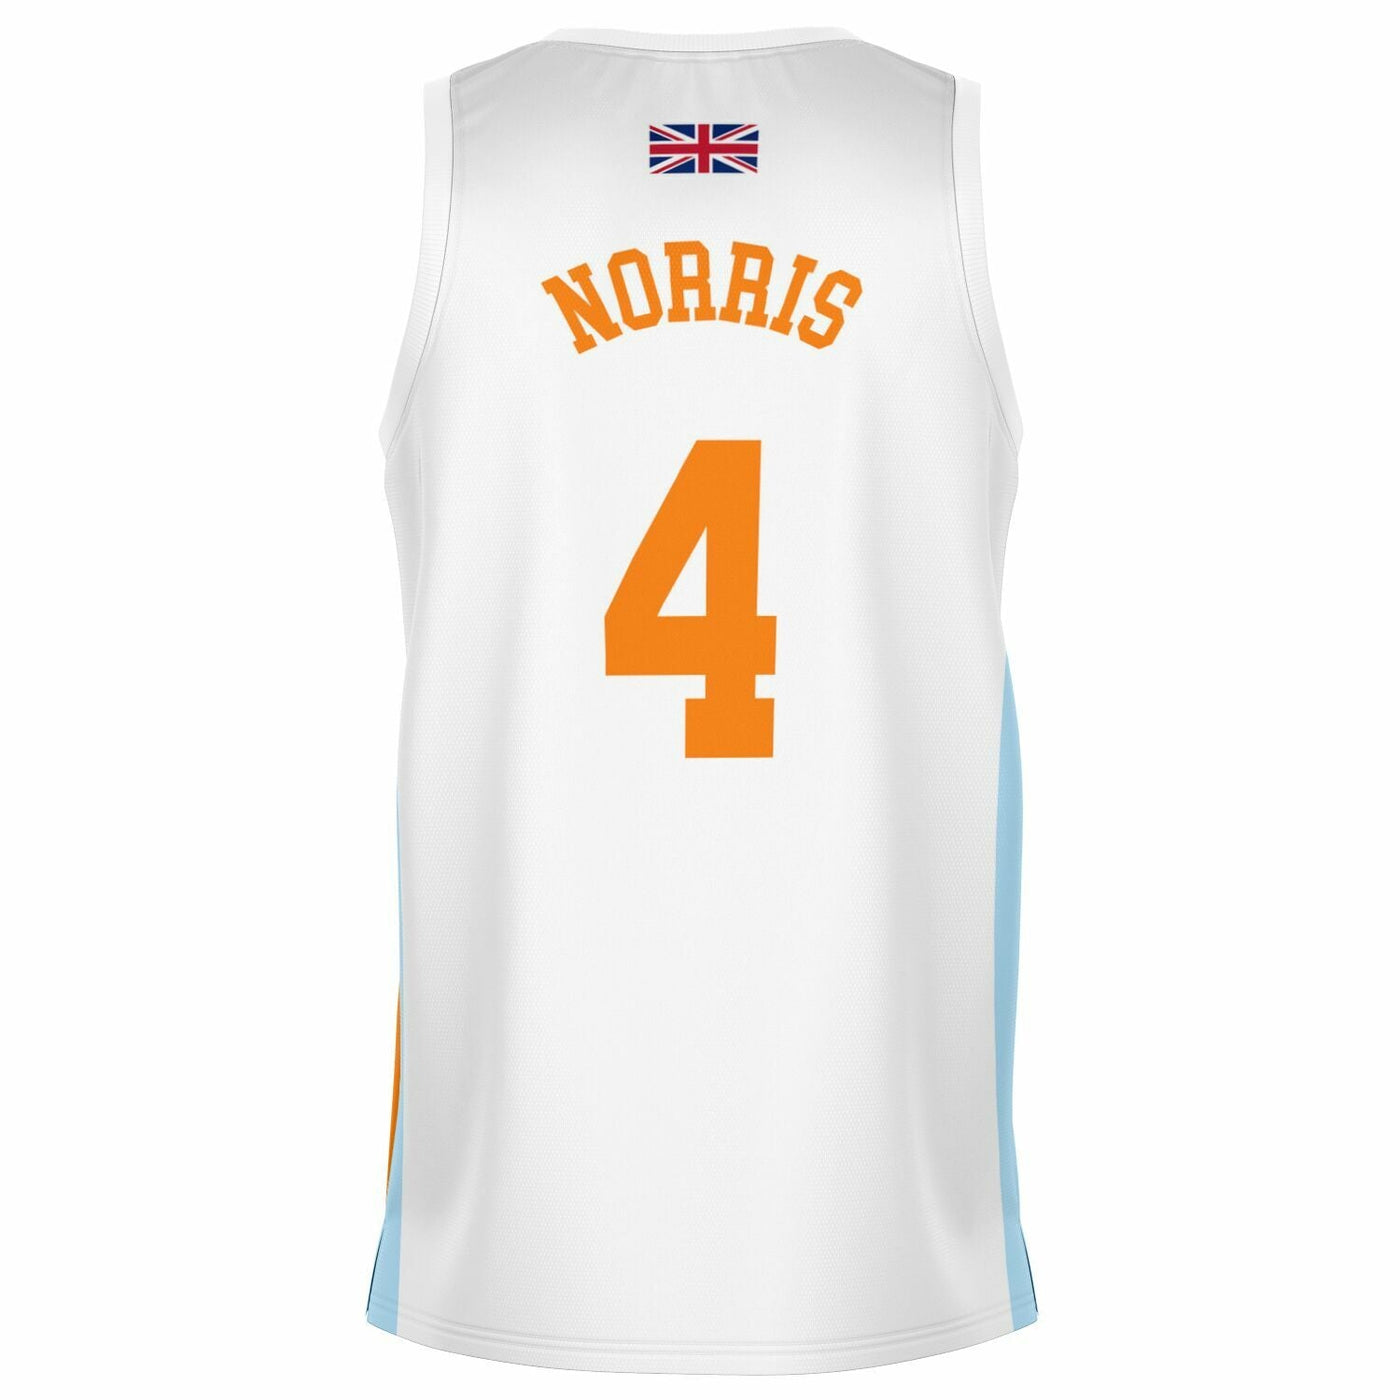 Norris - Home White Classic Edition Jersey - Furious Motorsport